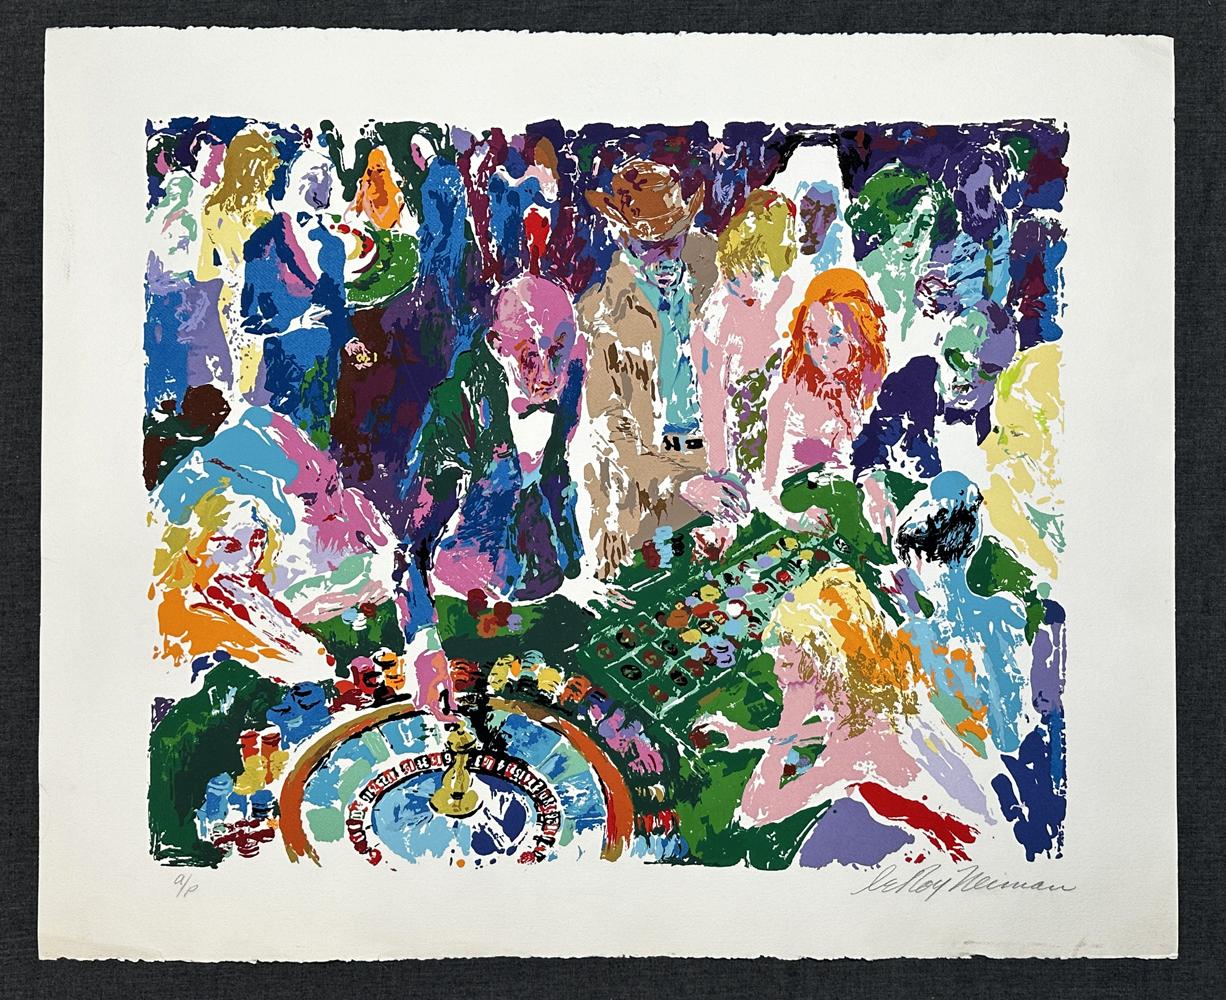 Artist: LeRoy Neiman (American, 1921-2012)
Title: Casino
Year: 1972
Medium: Silkscreen, signed and marked A P ( Artist Proof)  in pencil
Edition: AP
Paper  Size: 31¾  x 26 inches



LeRoy Neiman was a sports artist, a chronicler of contemporary